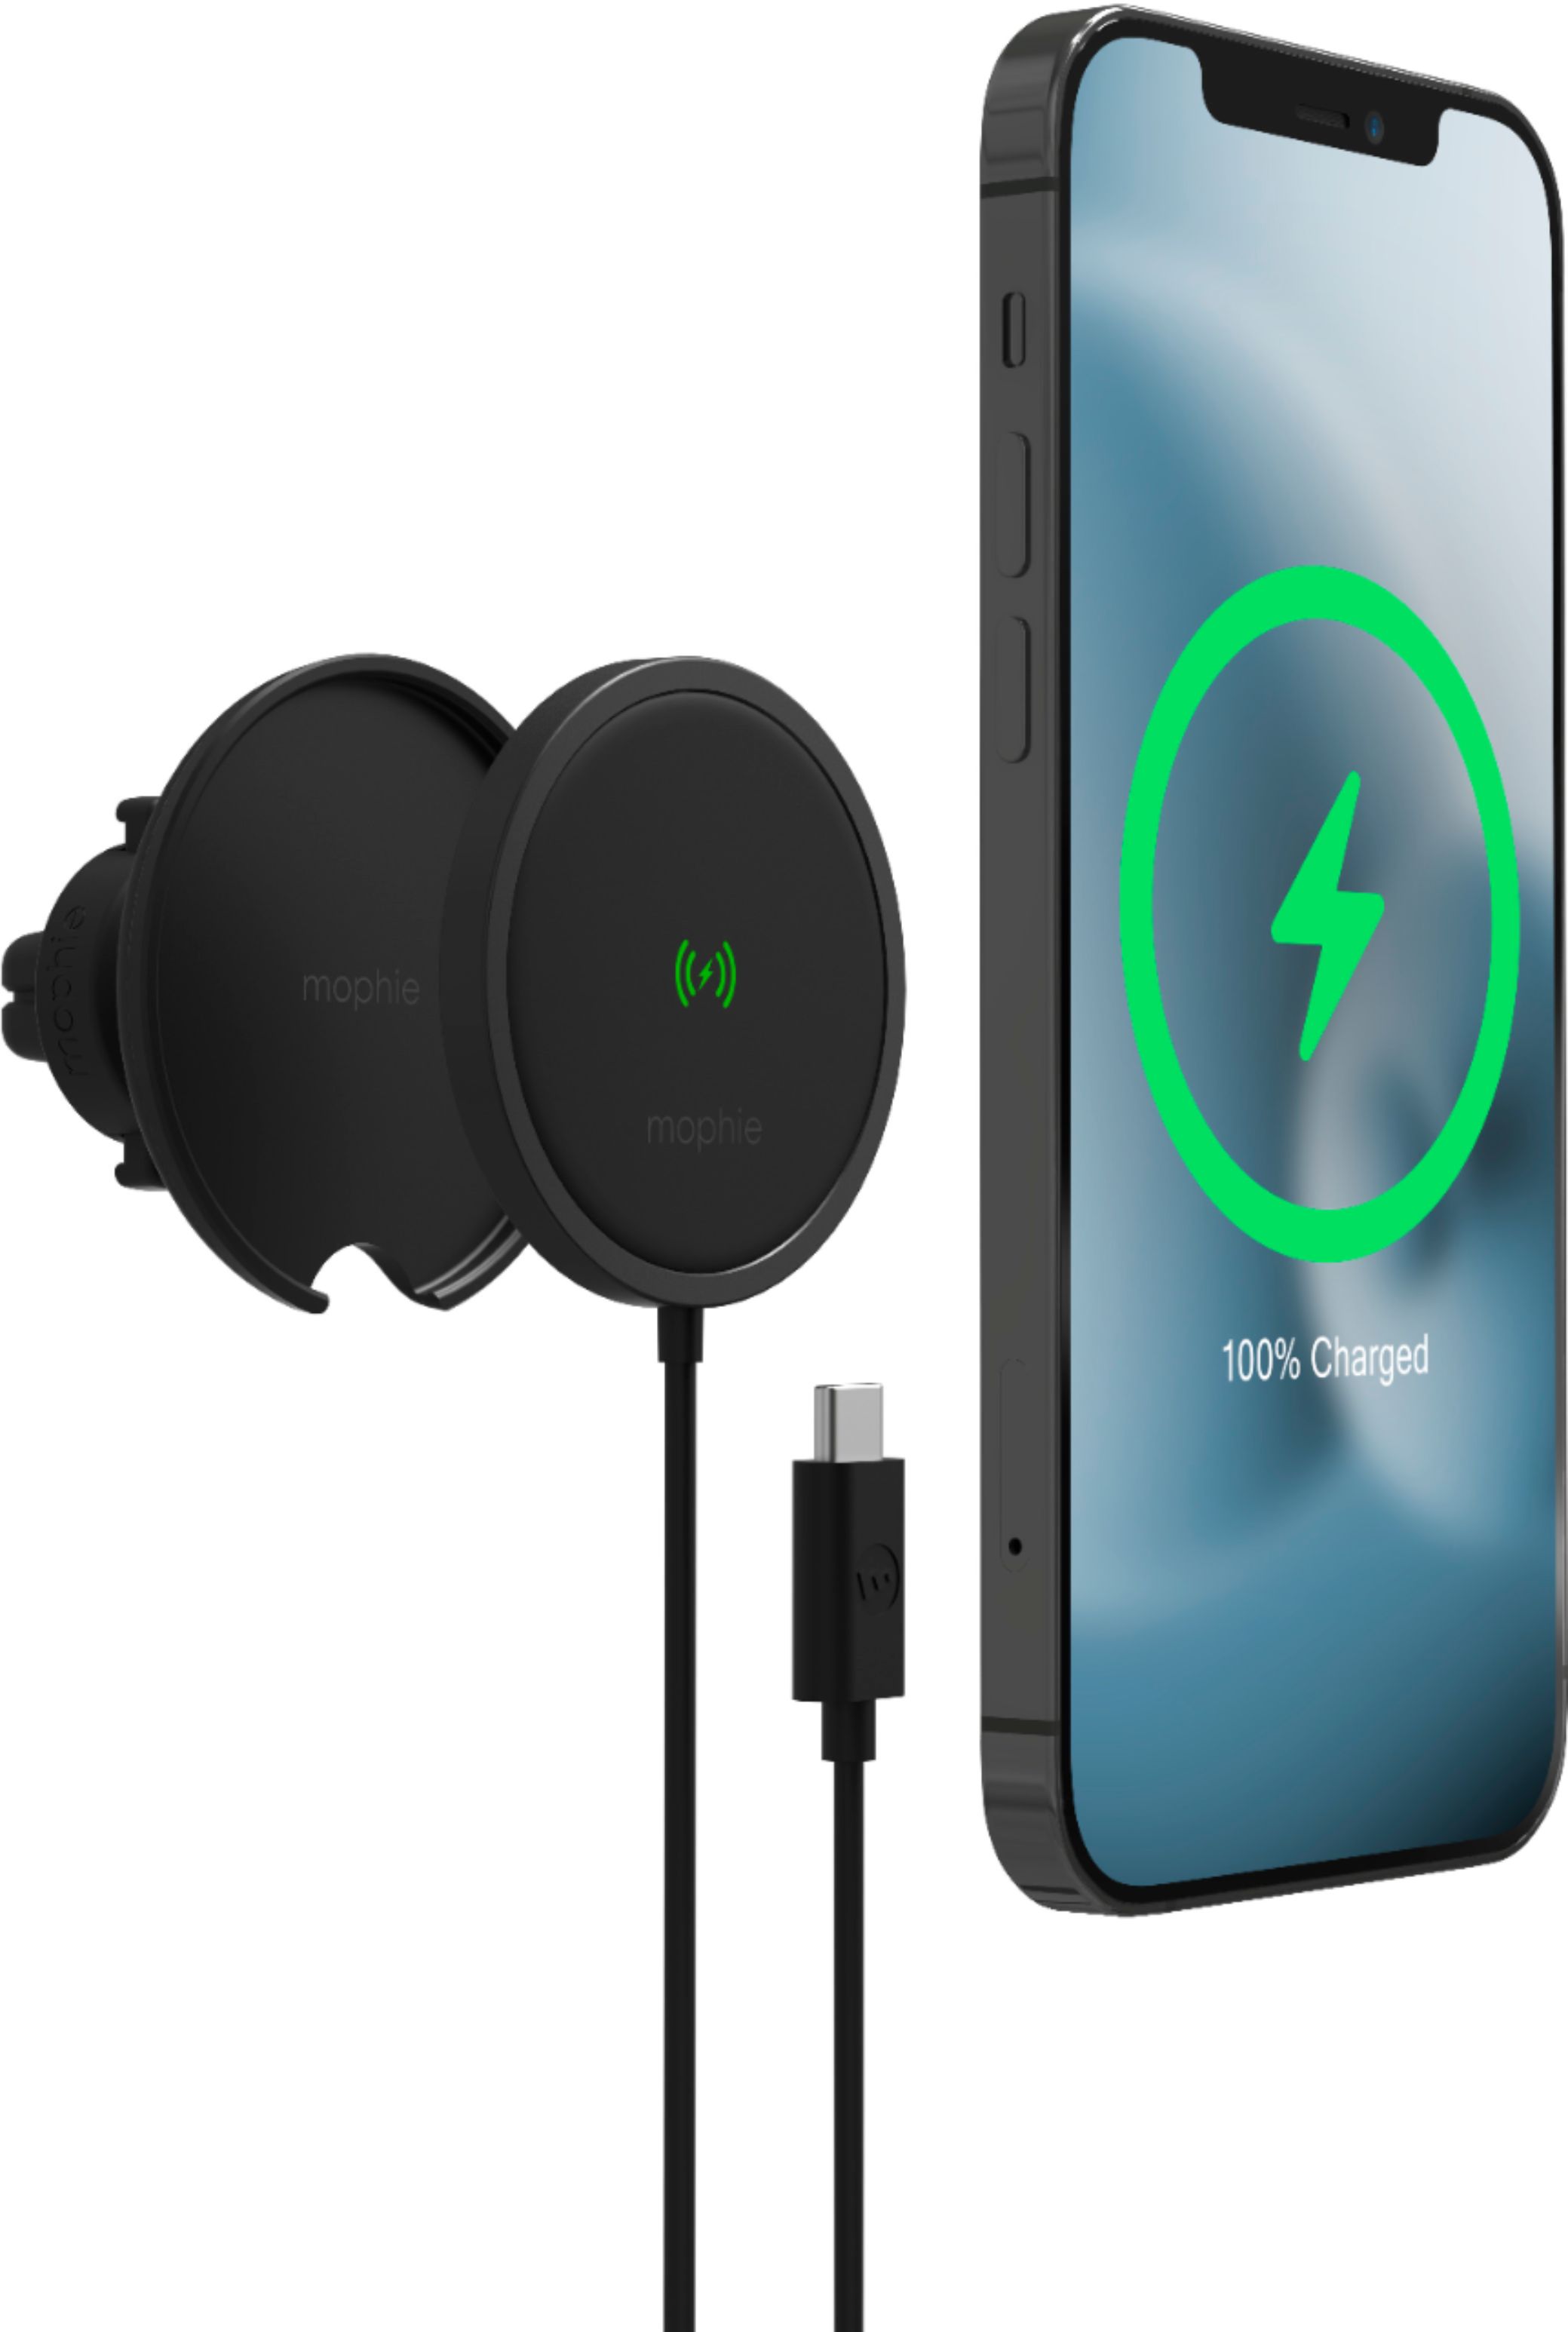 mophie Snap+ 15W Wireless Charging Vent Mount with MagSafe Compatibility  Black 401307635 - Best Buy